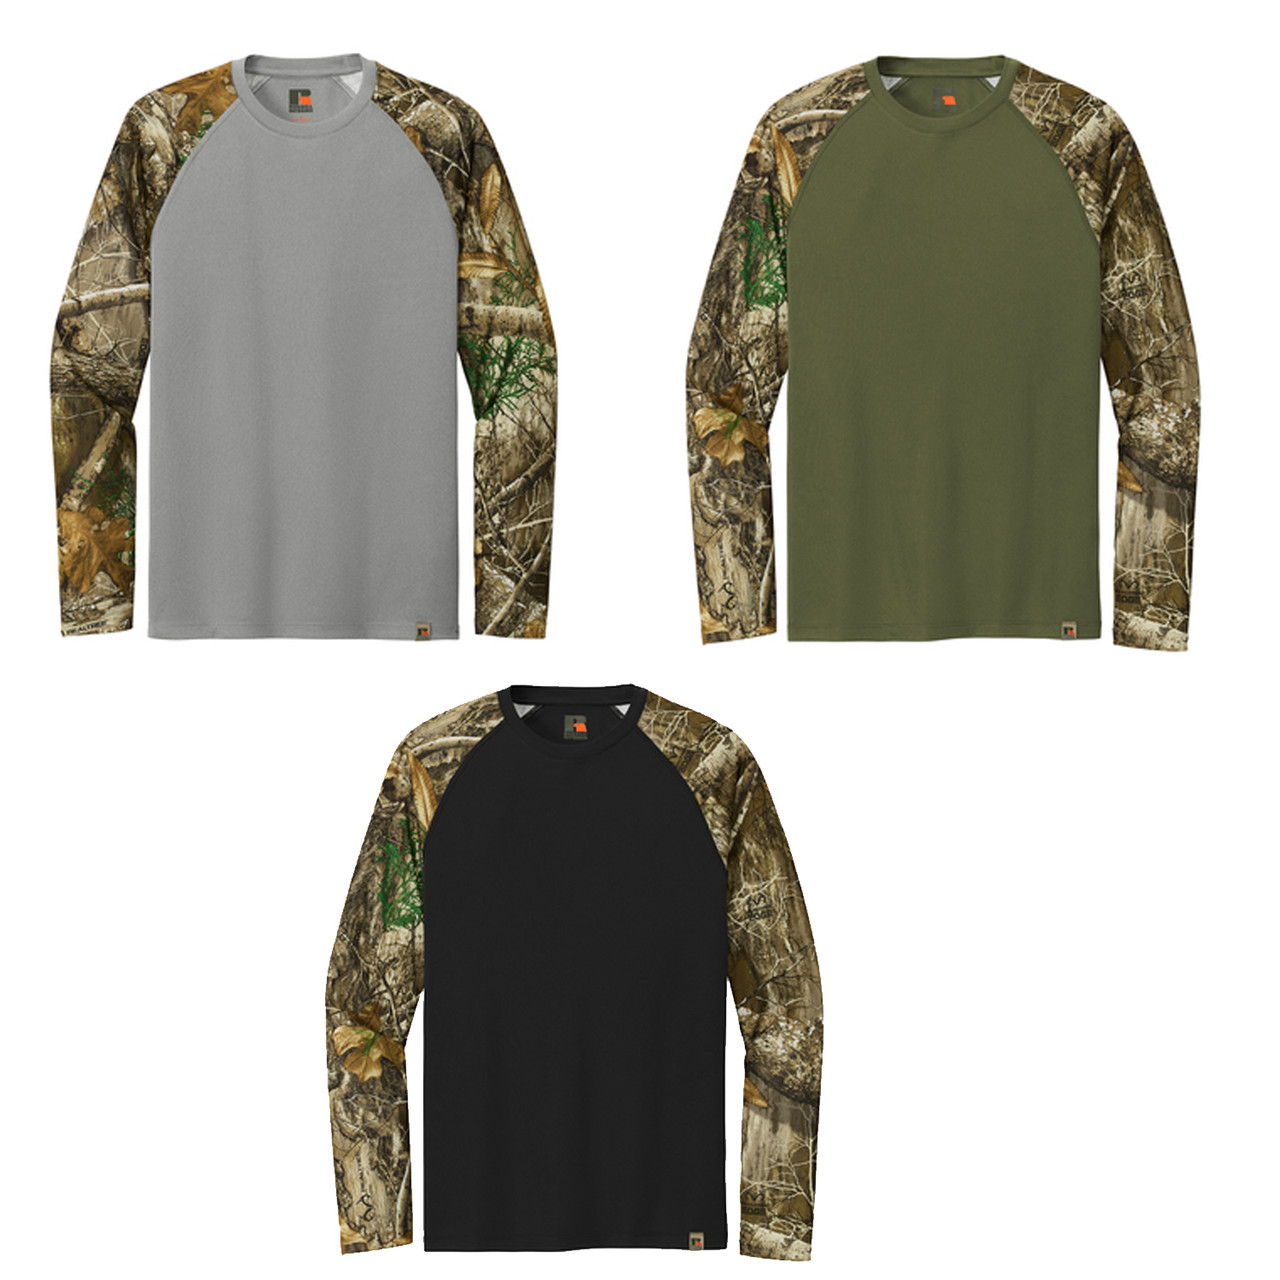 Russell Outdoors™ Camo Performance Long Sleeve Shirt - Men's** (Restrictions Apply - see description)